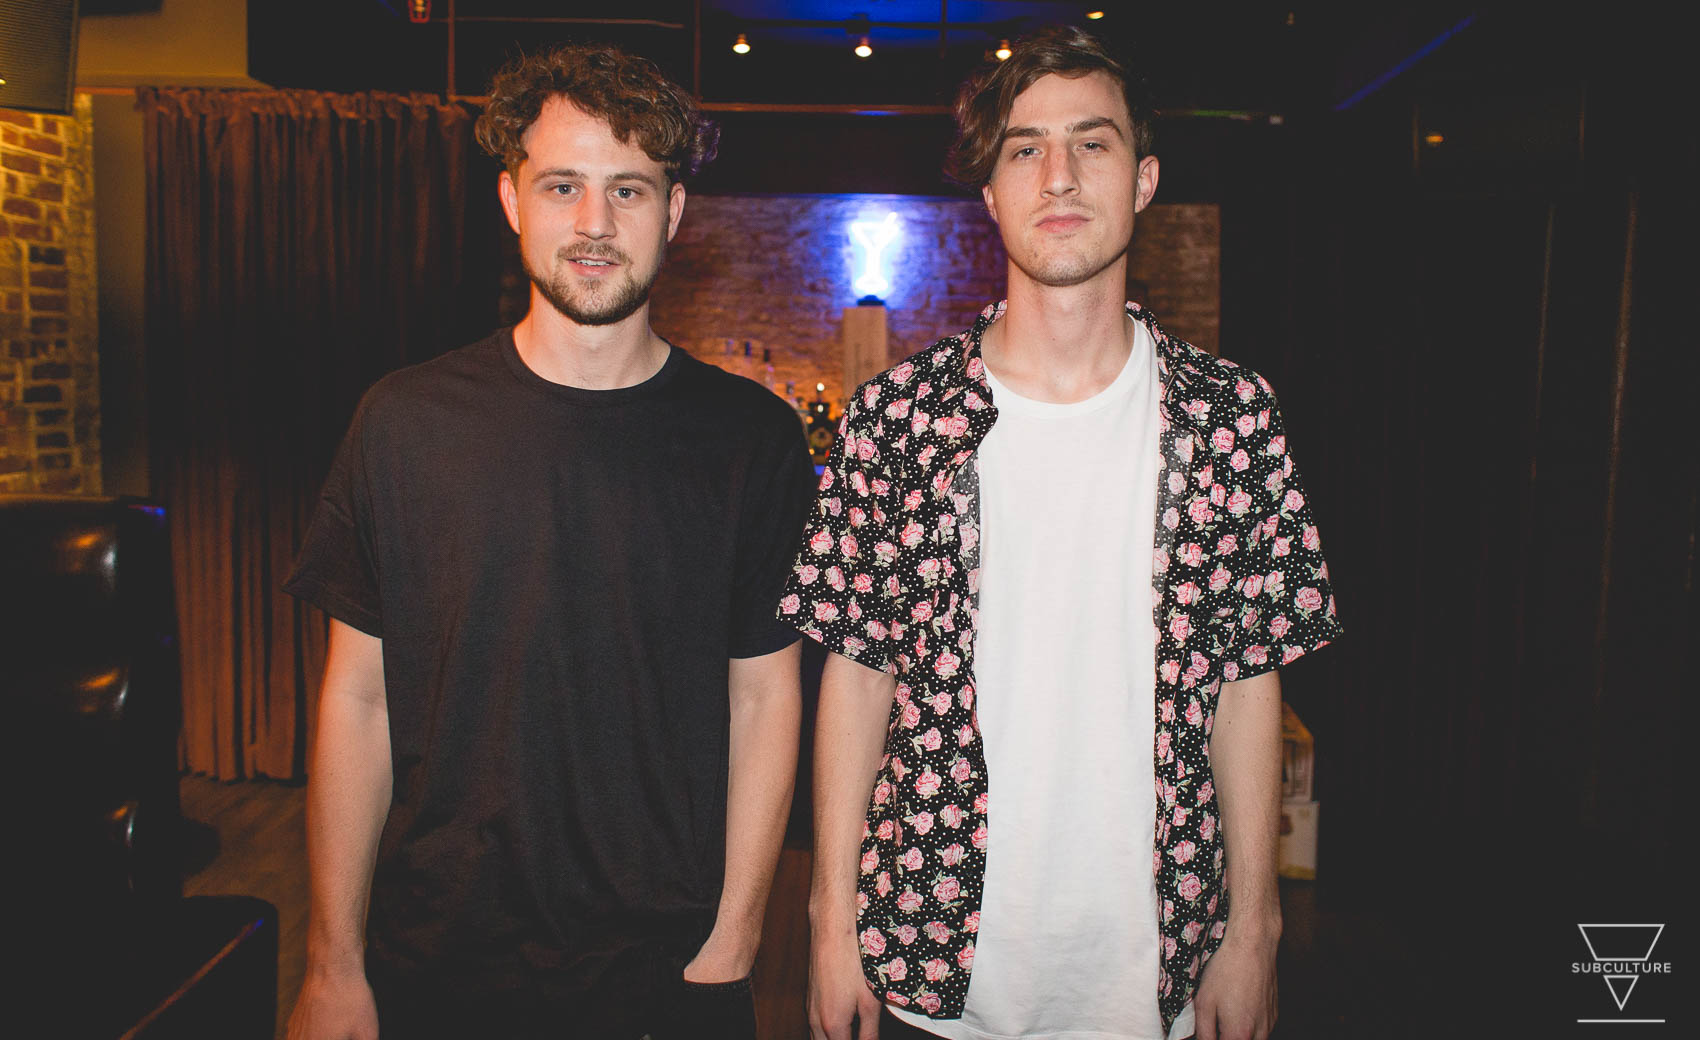 Hippie Sabotage's SF Debut at Subculture SF, 3/26 [Event Review] The